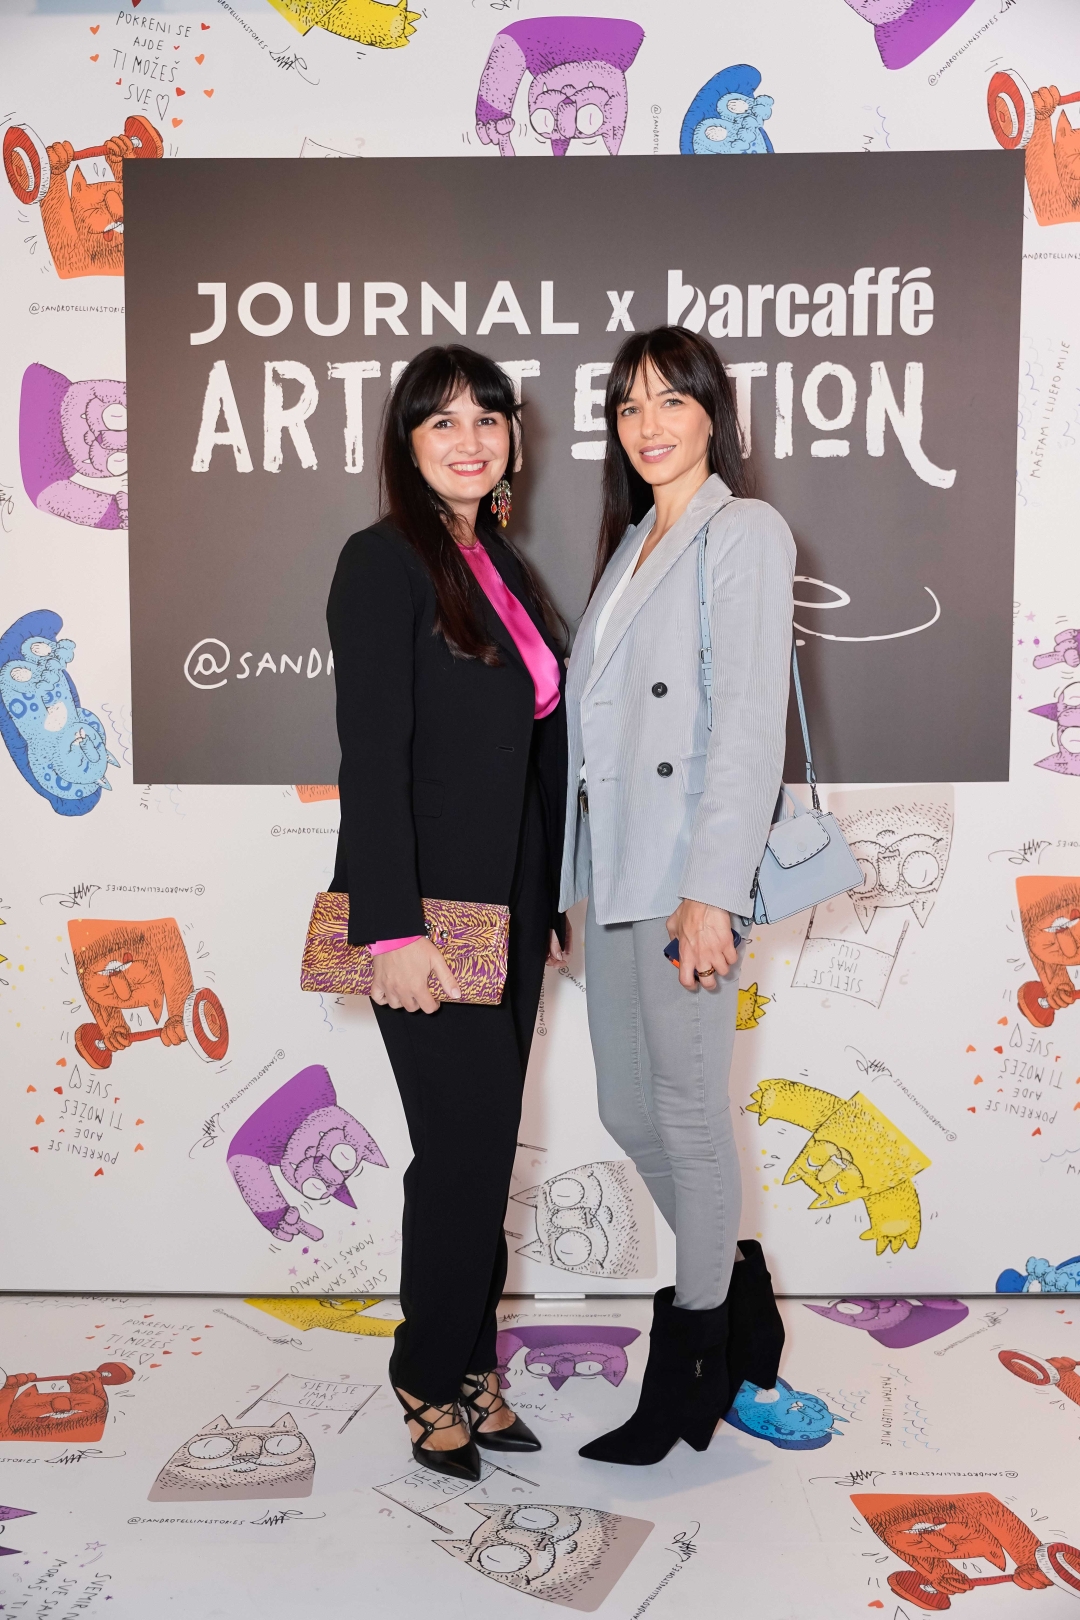 Journal Barcafee event